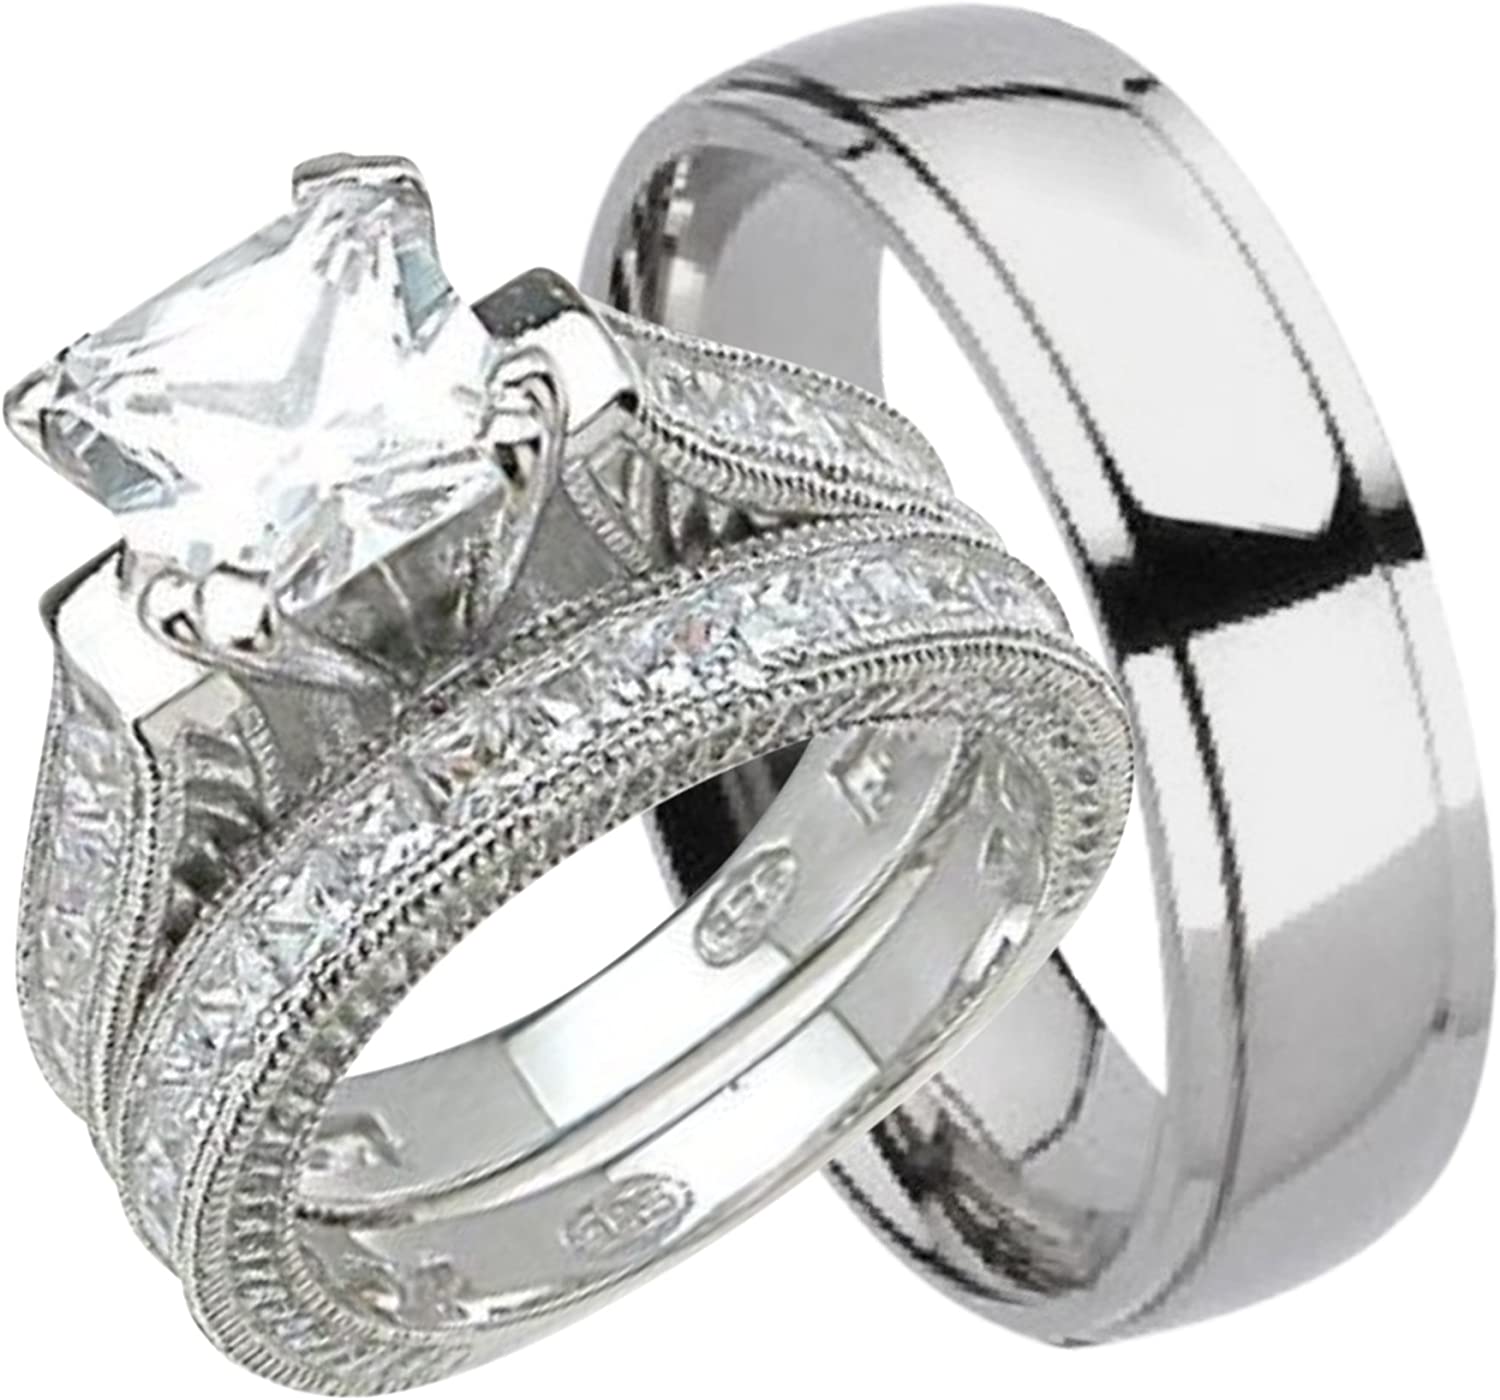 Amazon.com: His and Hers Wedding Ring Set Matching Trio Wedding Bands ...